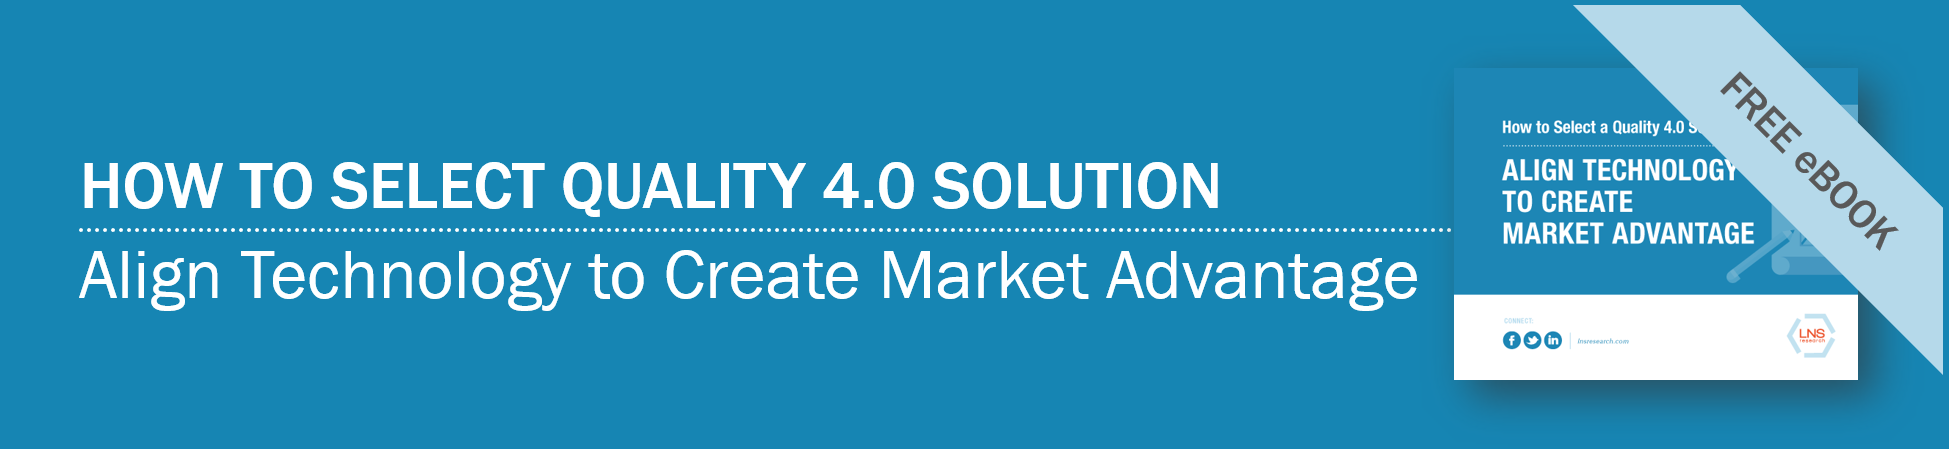 Ebook: How to Select a Quality 4.0 Solution: Align Technology to Create Market Advantage